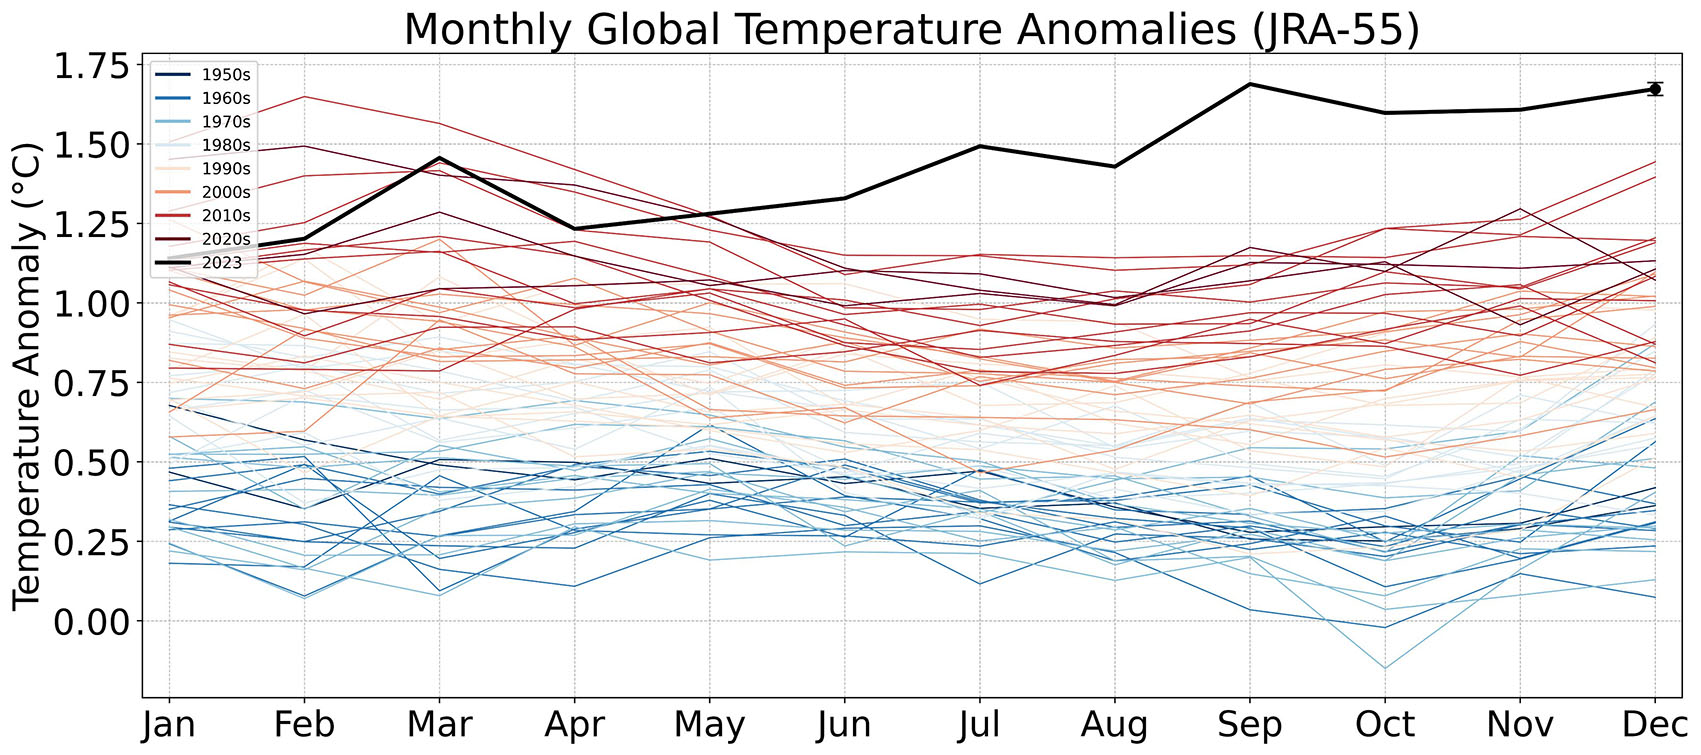 Fig. 2: Average temperatures reached 1.5°C in mid 2023 and climbed higher throughout the rest of the year. Image: Zeke Hausfather.